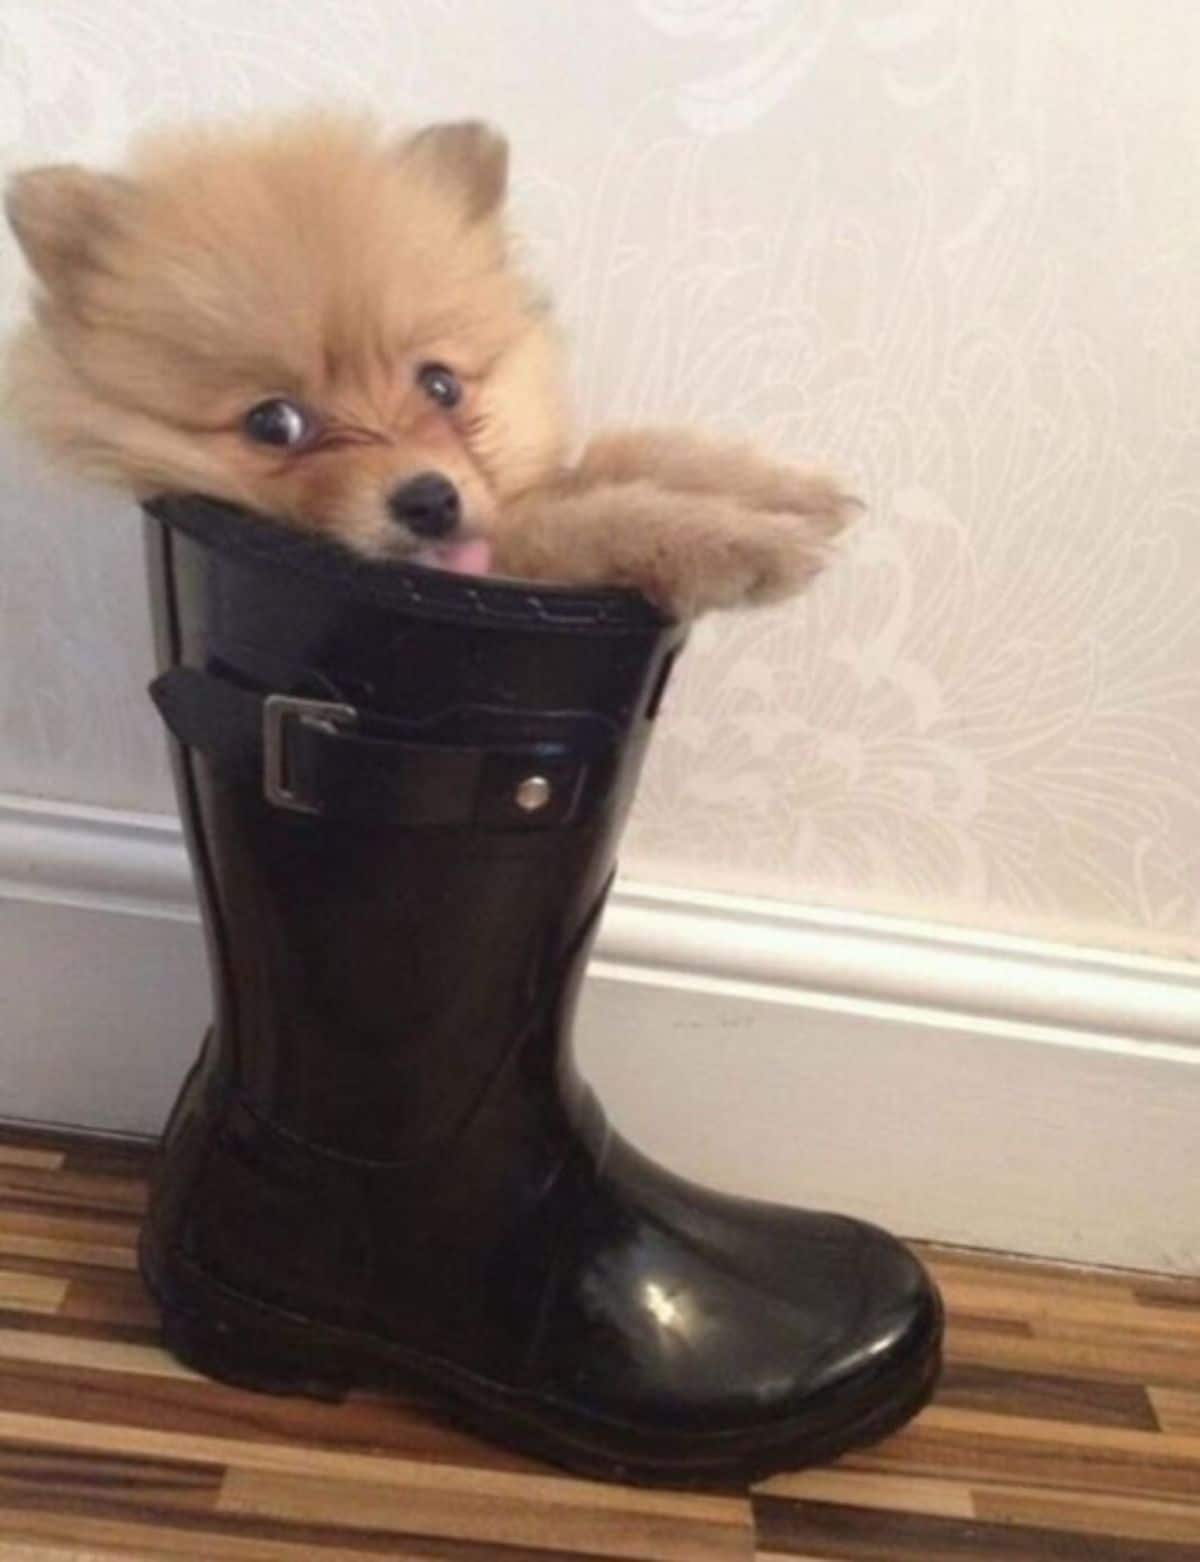 fluffy brown puppy sitting inside a black boot with the head and front paws sticking out